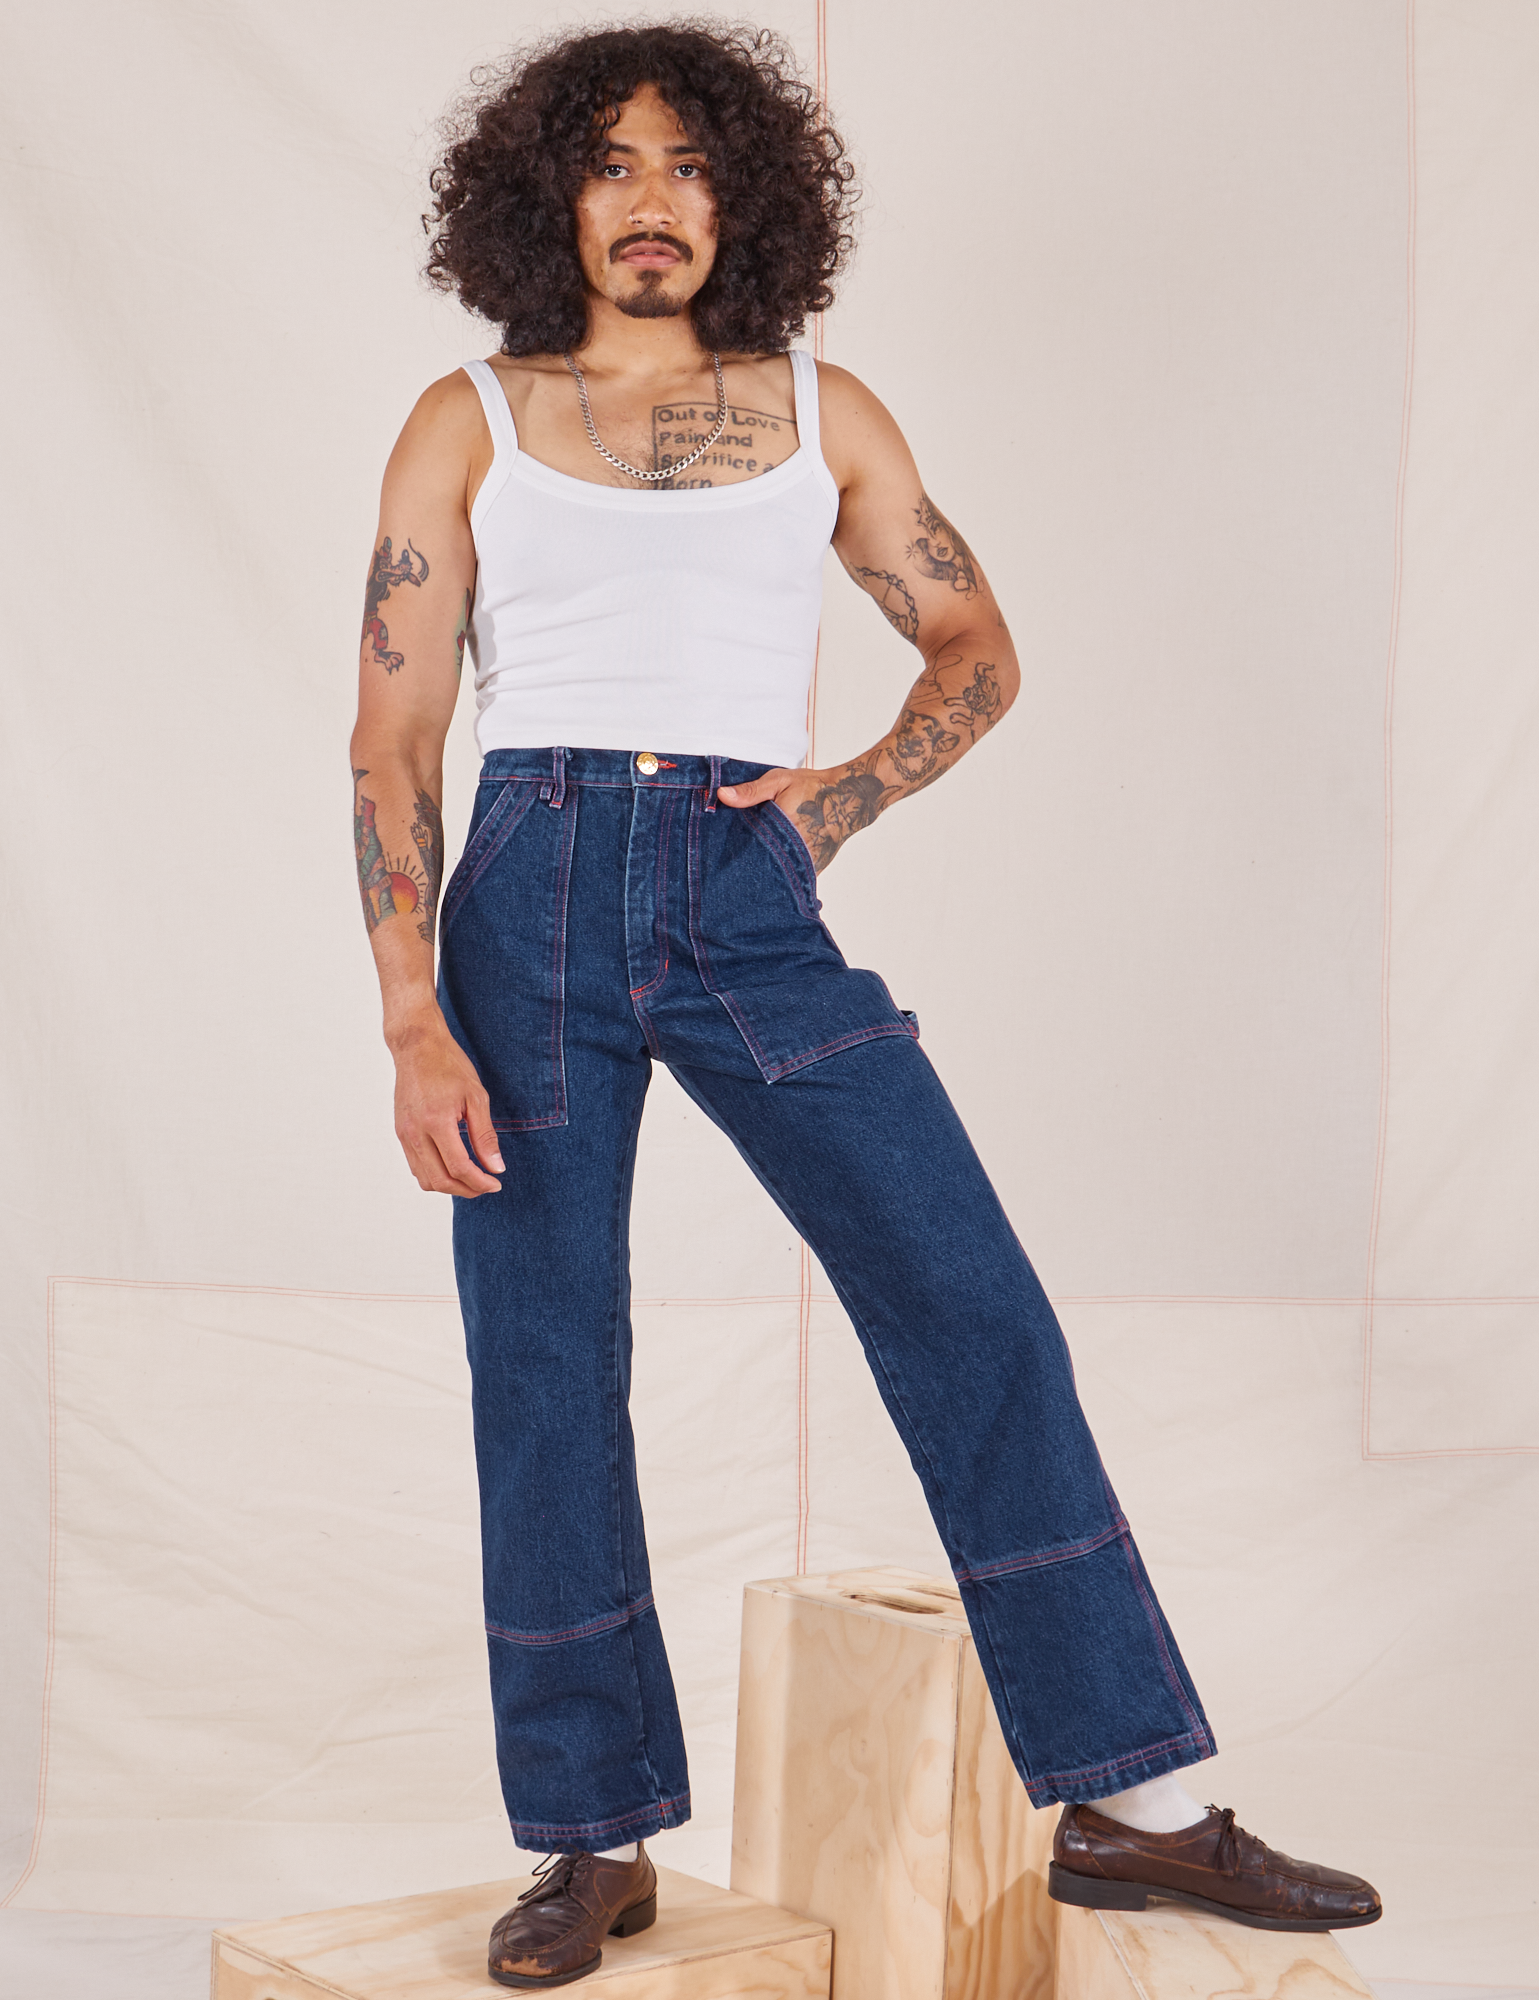 Jesse is 5&#39;8&quot; and wearing XS Carpenter Jeans in Dark Wash paired with a vintage off-white Cami